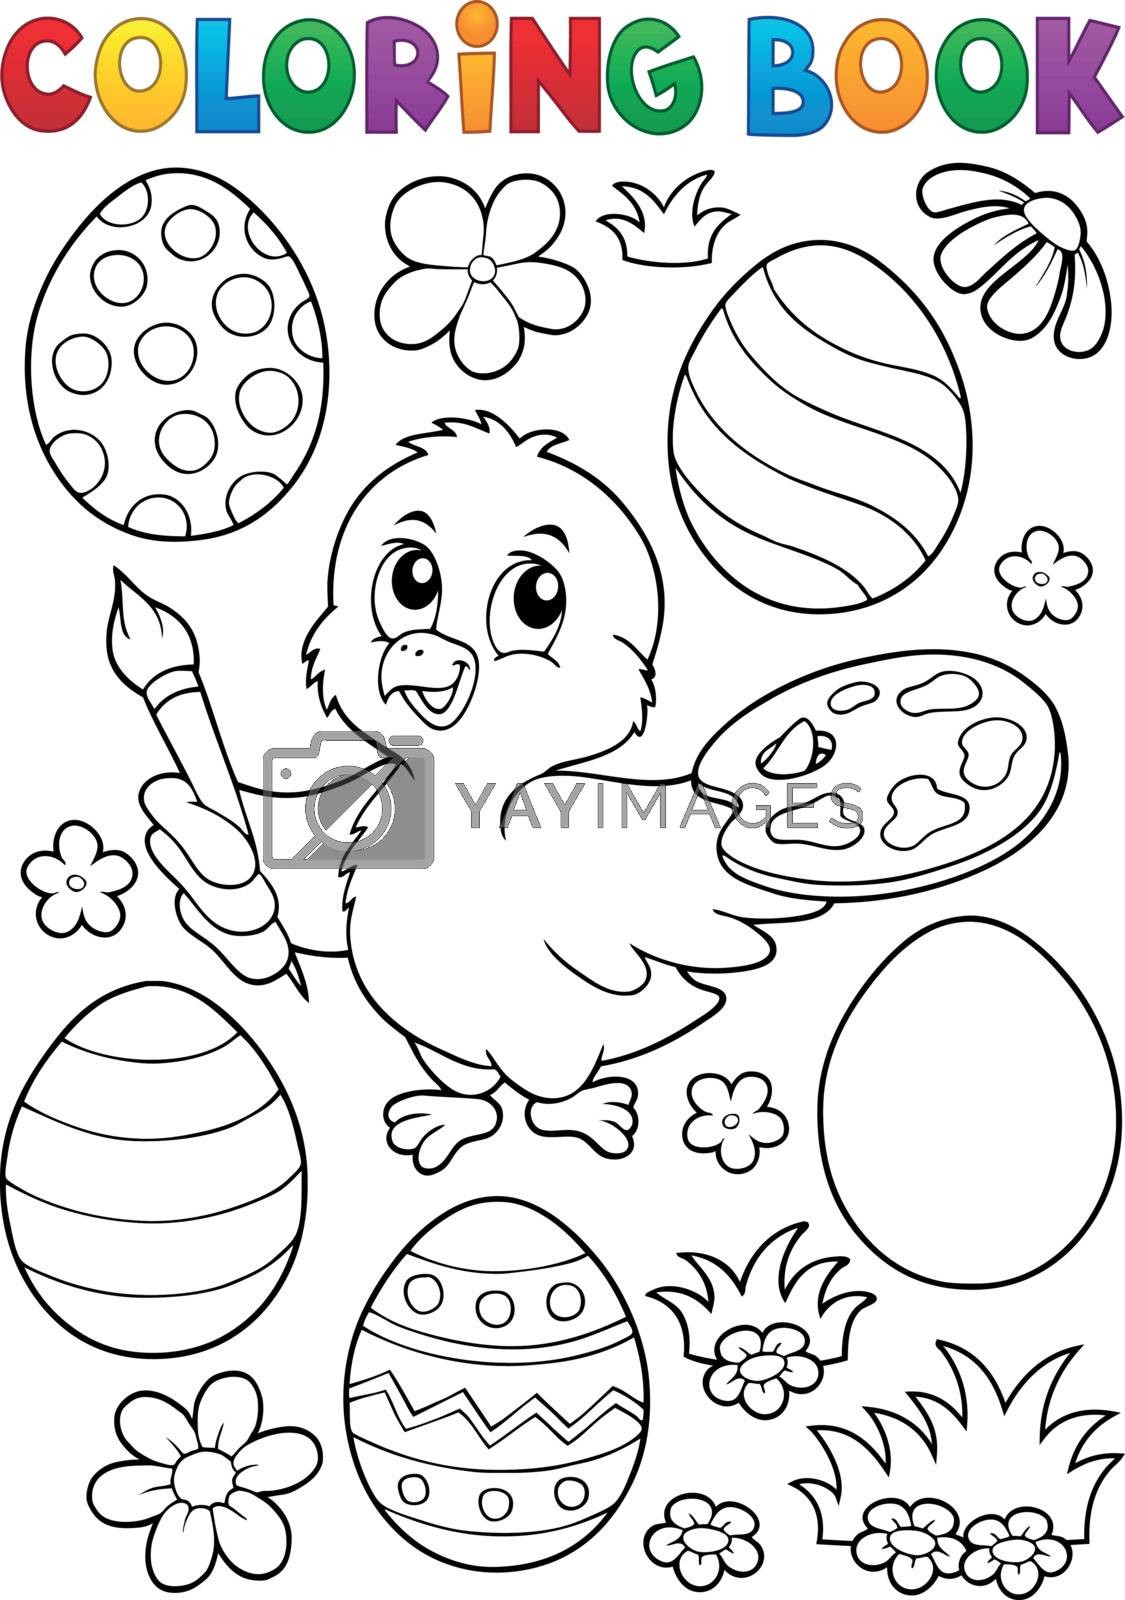 Royalty free image of Coloring book Easter eggs and chicken 1 by clairev